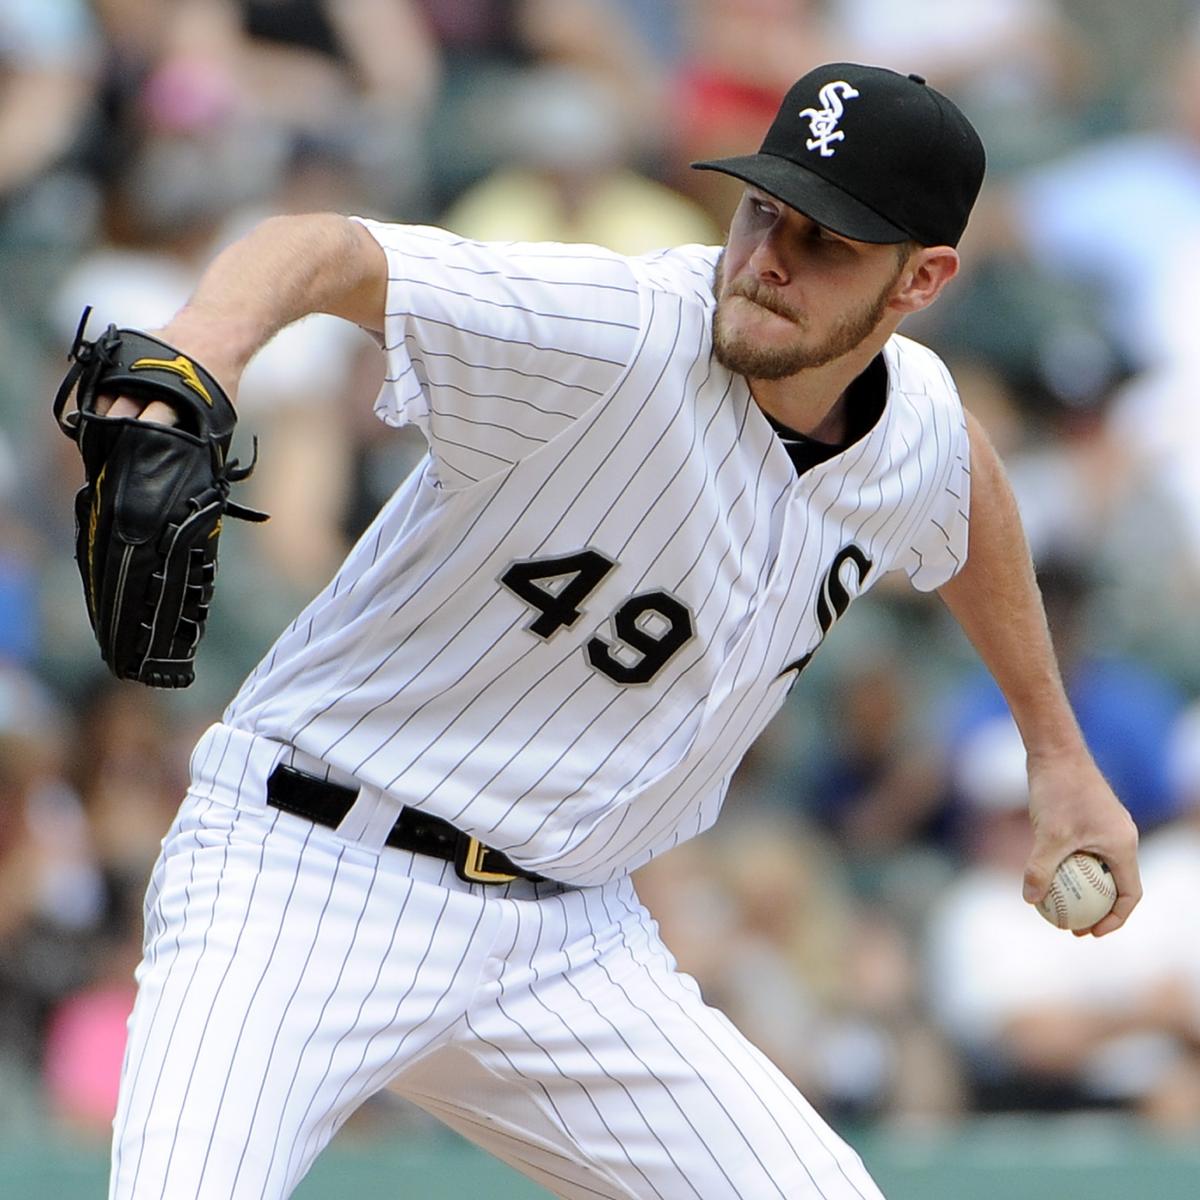 Red Sox get ace Chris Sale from White Sox, reliever Thornburg from Brewers